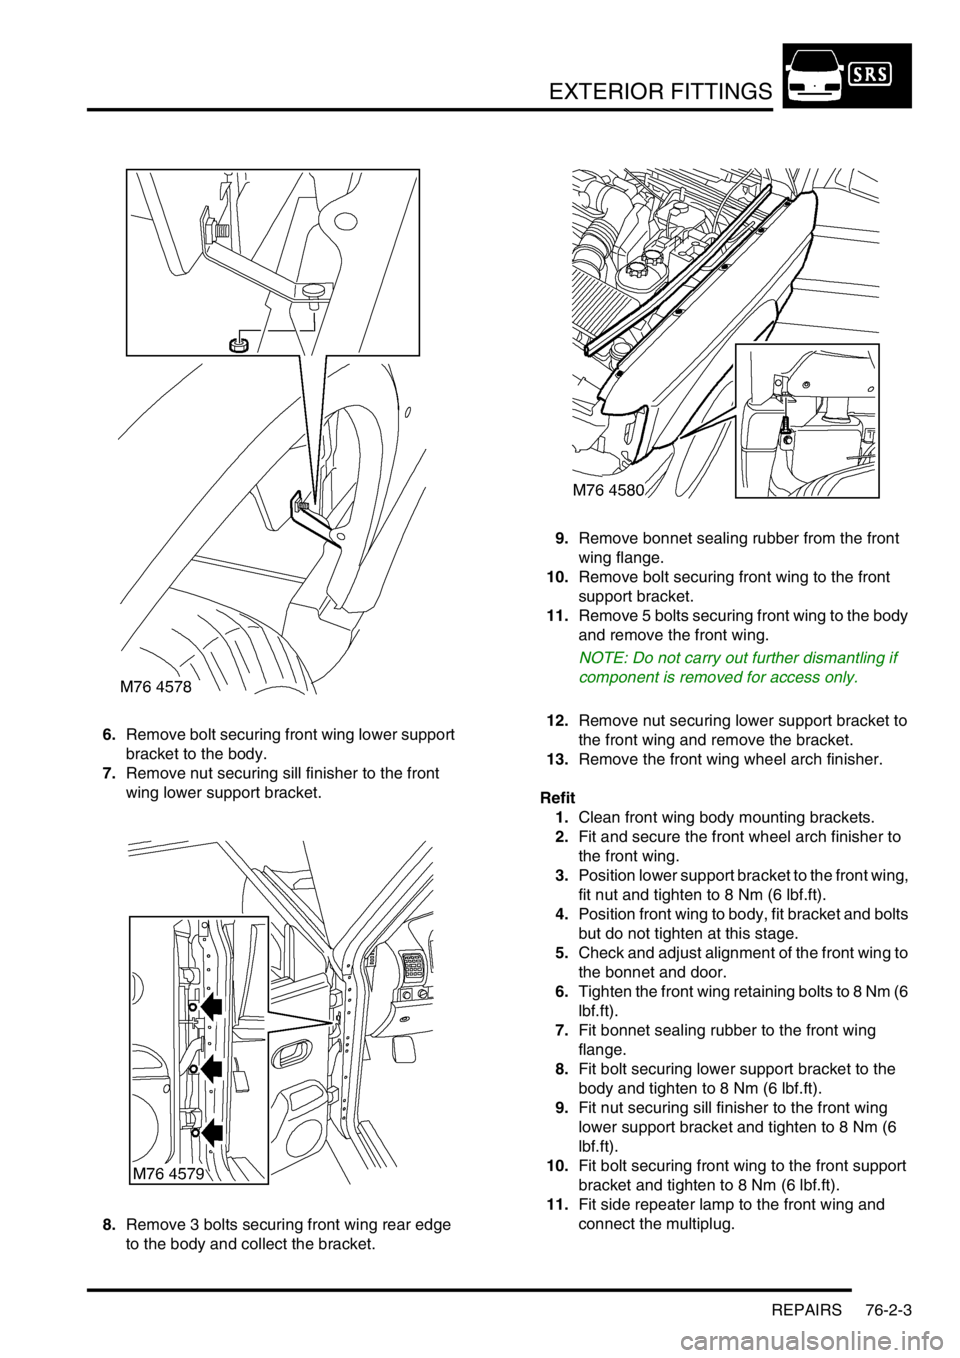 LAND ROVER DISCOVERY 2002 Owners Manual EXTERIOR FITTINGS
REPAIRS 76-2-3
6.Remove bolt securing front wing lower support 
bracket to the body.
7.Remove nut securing sill finisher to the front 
wing lower support bracket.
8.Remove 3 bolts se